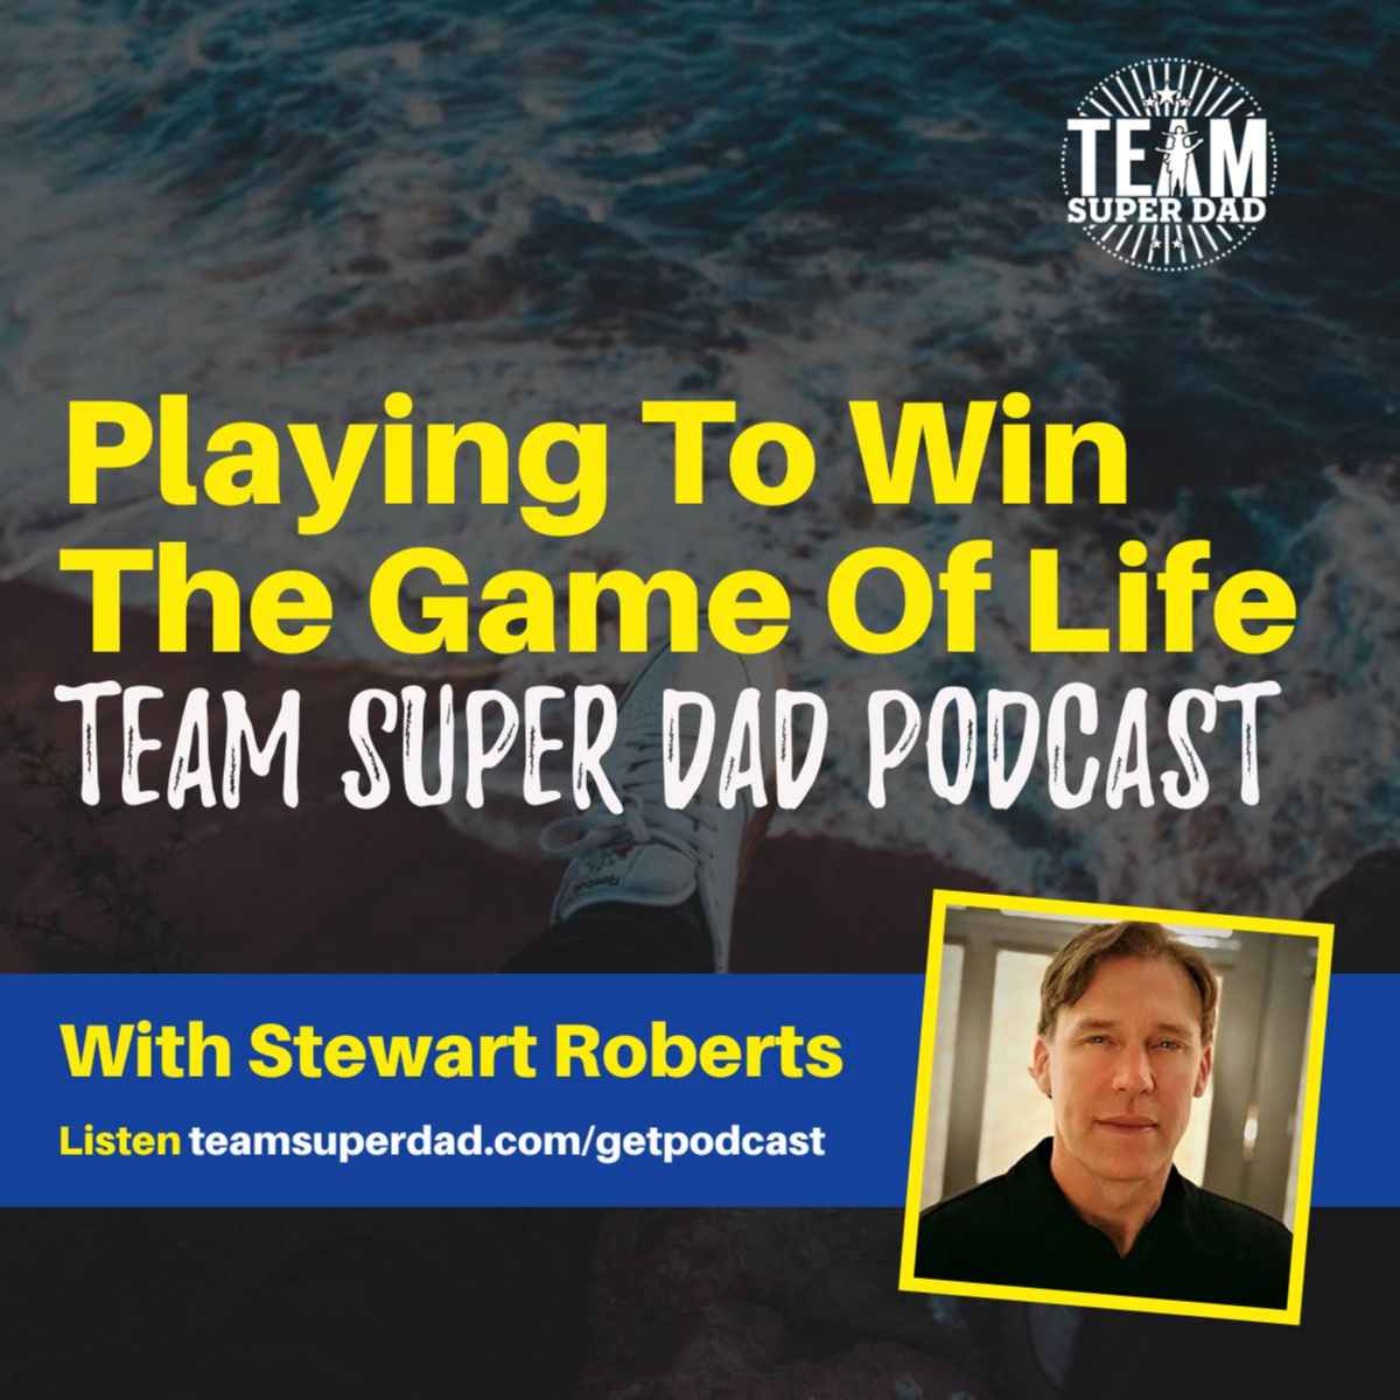 Playing To Win The Game Of Life with Stewart Roberts